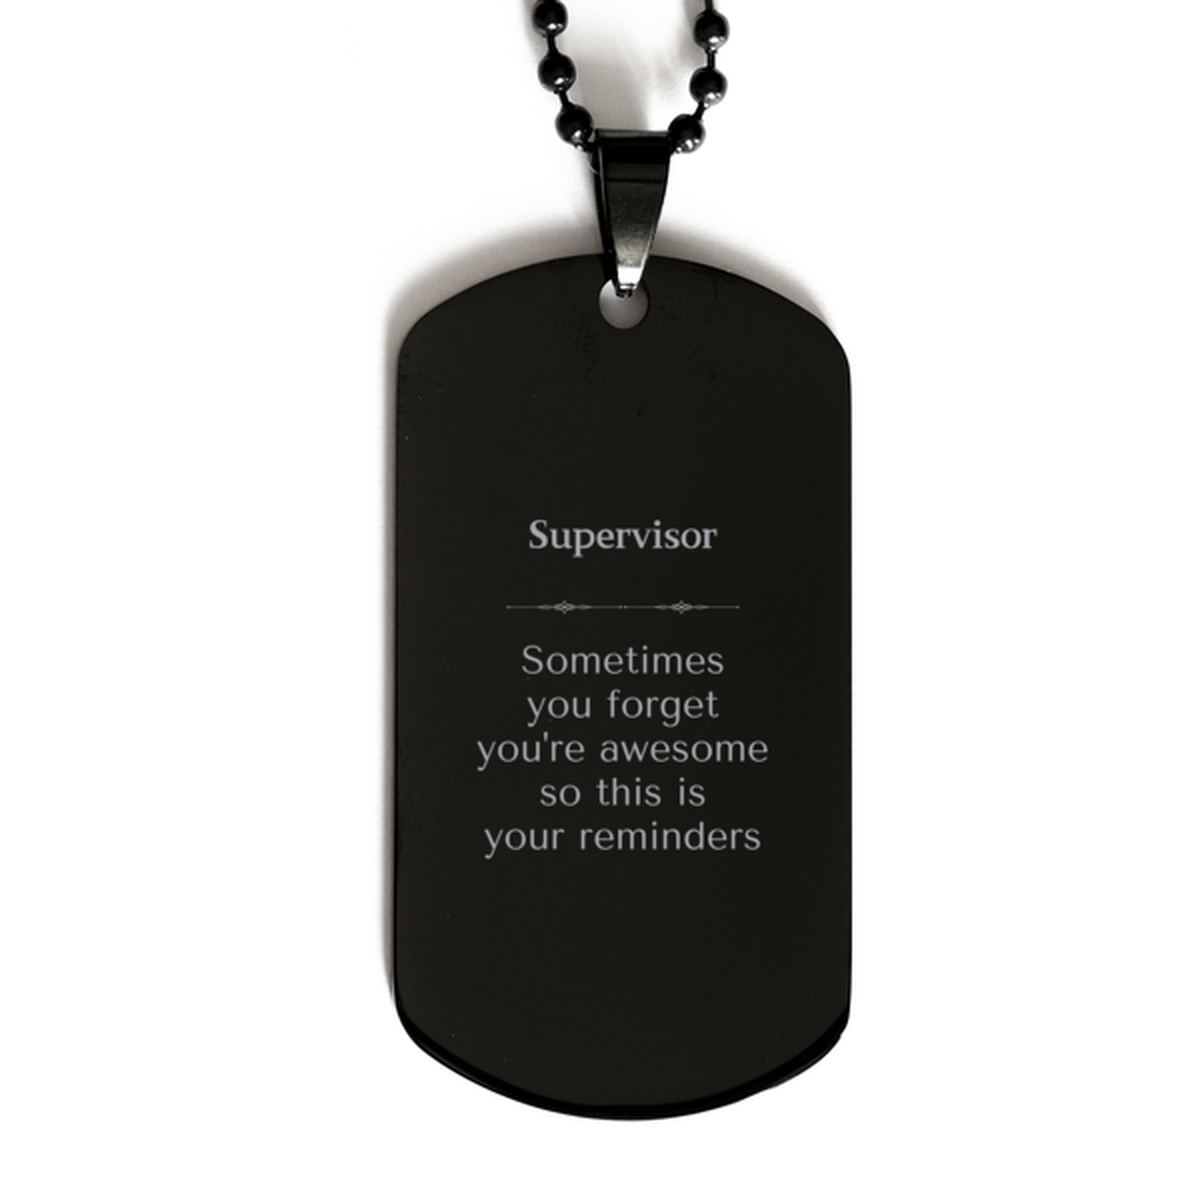 Sentimental Supervisor Black Dog Tag, Supervisor Sometimes you forget you're awesome so this is your reminders, Graduation Christmas Birthday Gifts for Supervisor, Men, Women, Coworkers